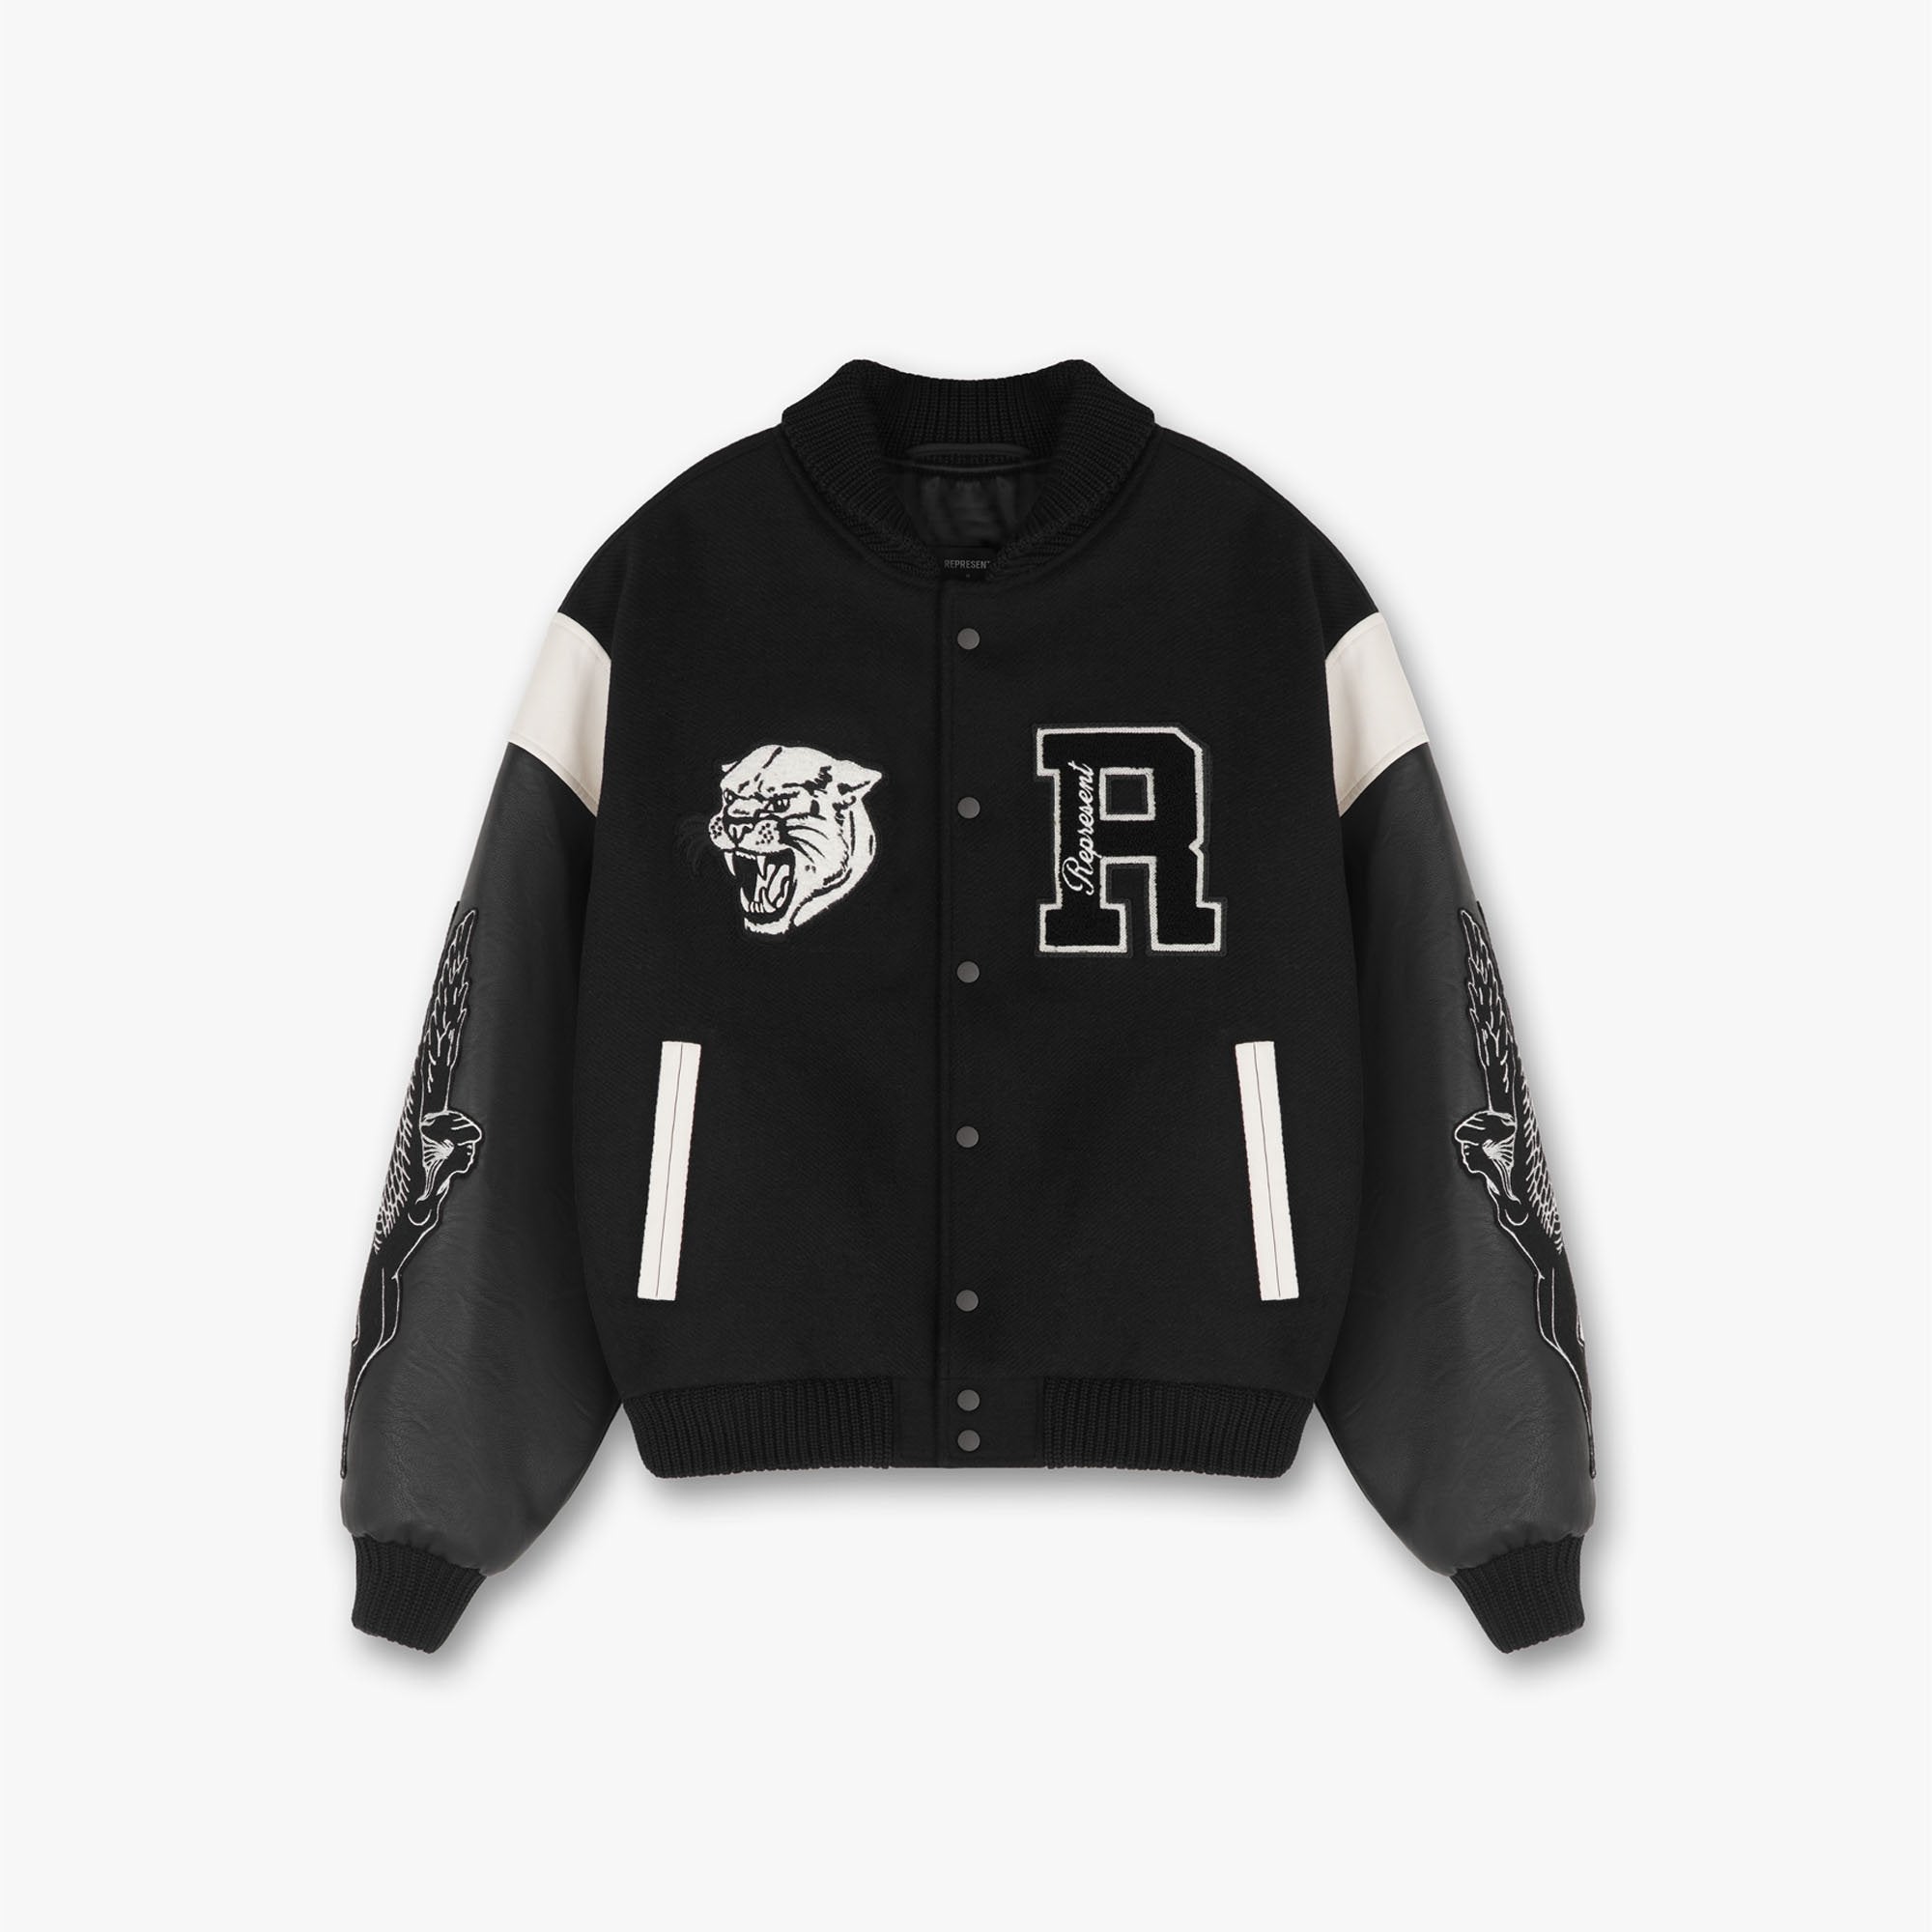 Best Selling Shopify Products on eu.representclo.com-1